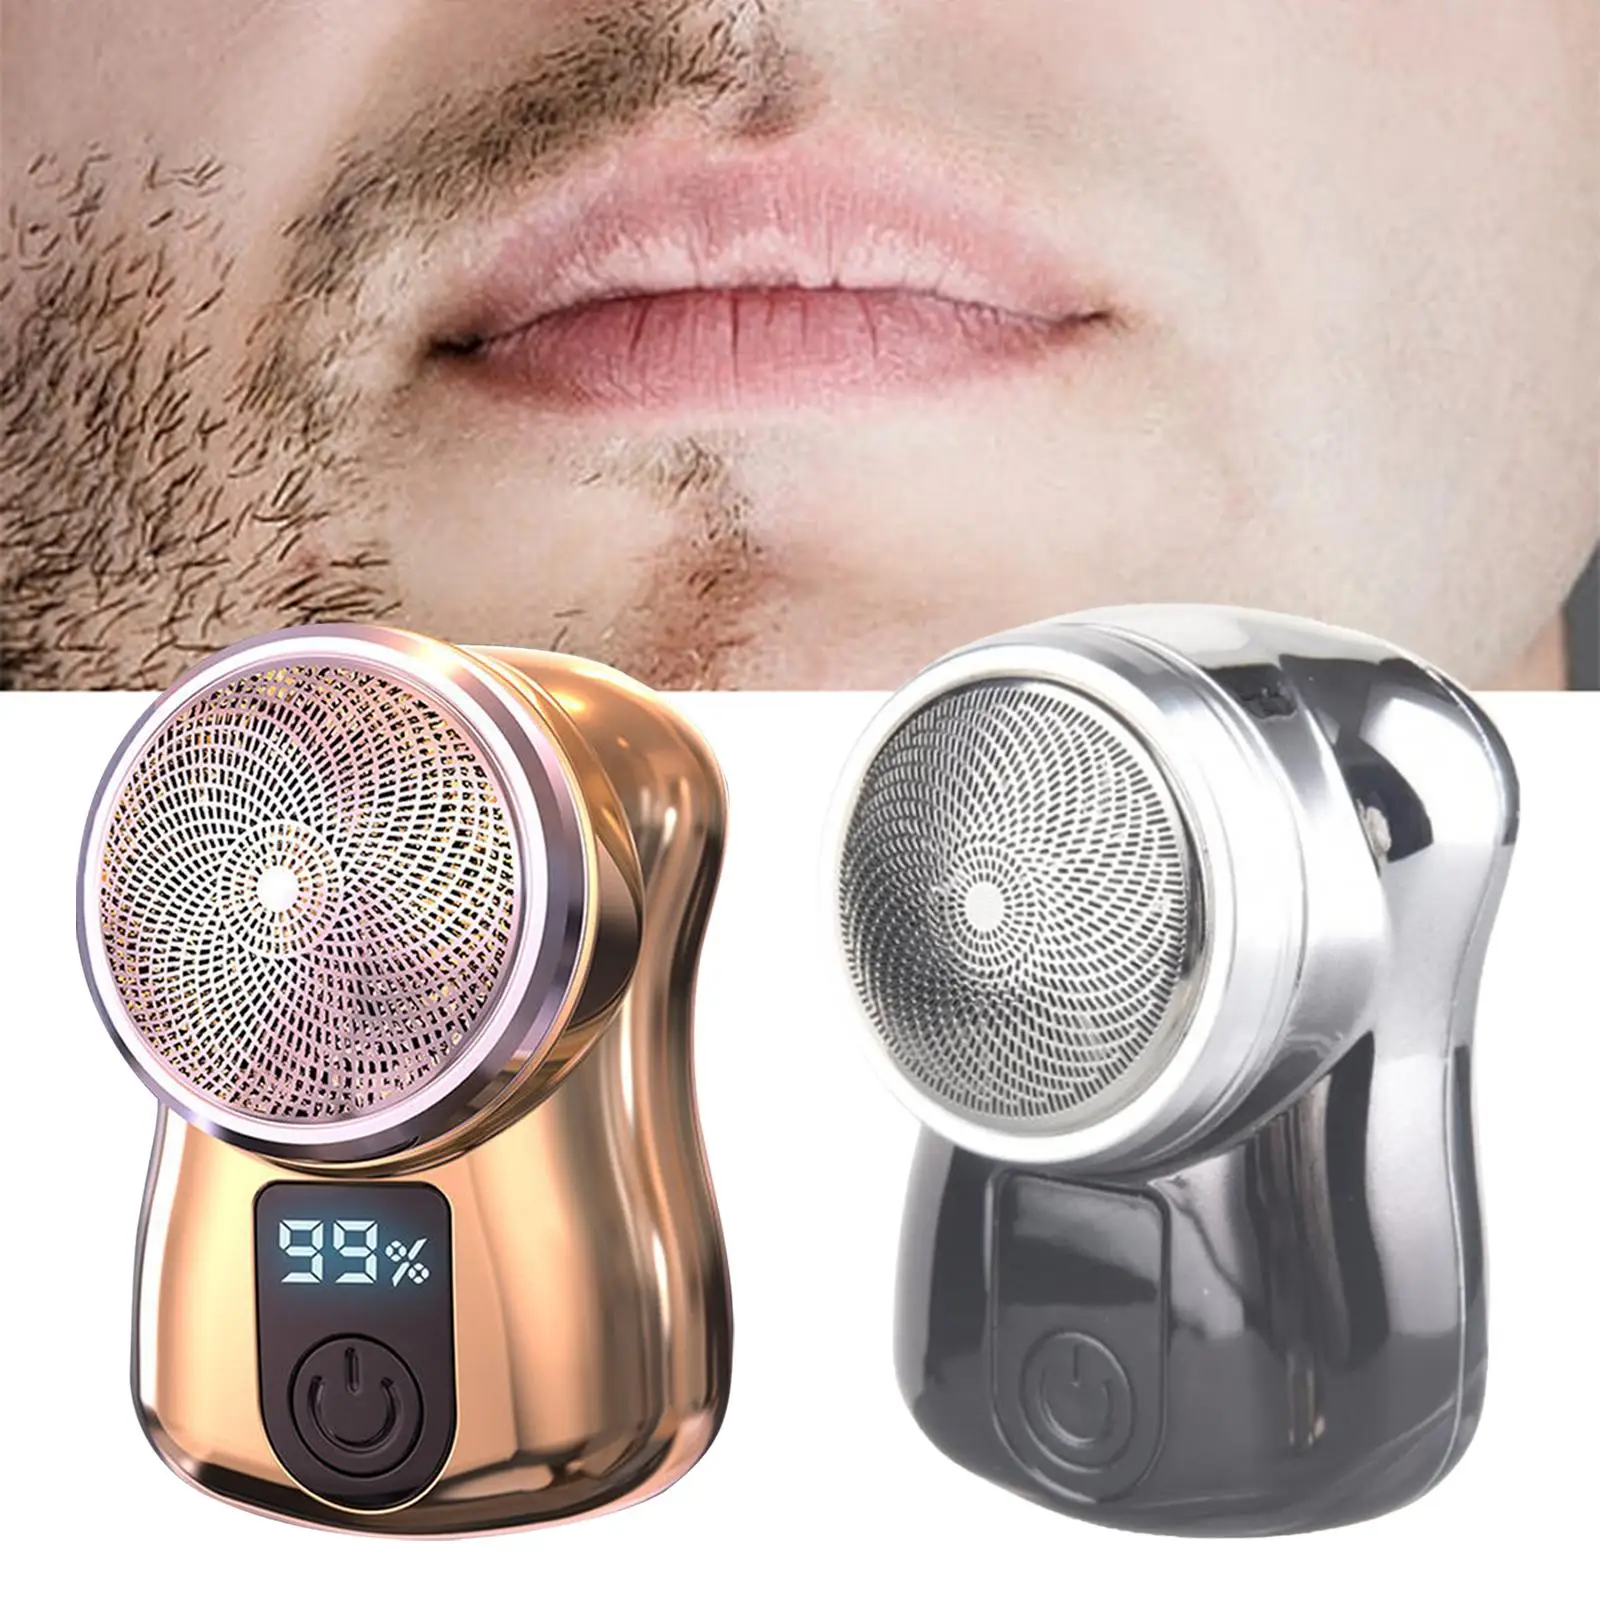 Mini Shaver Strong Power Shaving Digital Display Removable and Washable Head Rechargeable Portable Cordless Beard Razor Trimmer